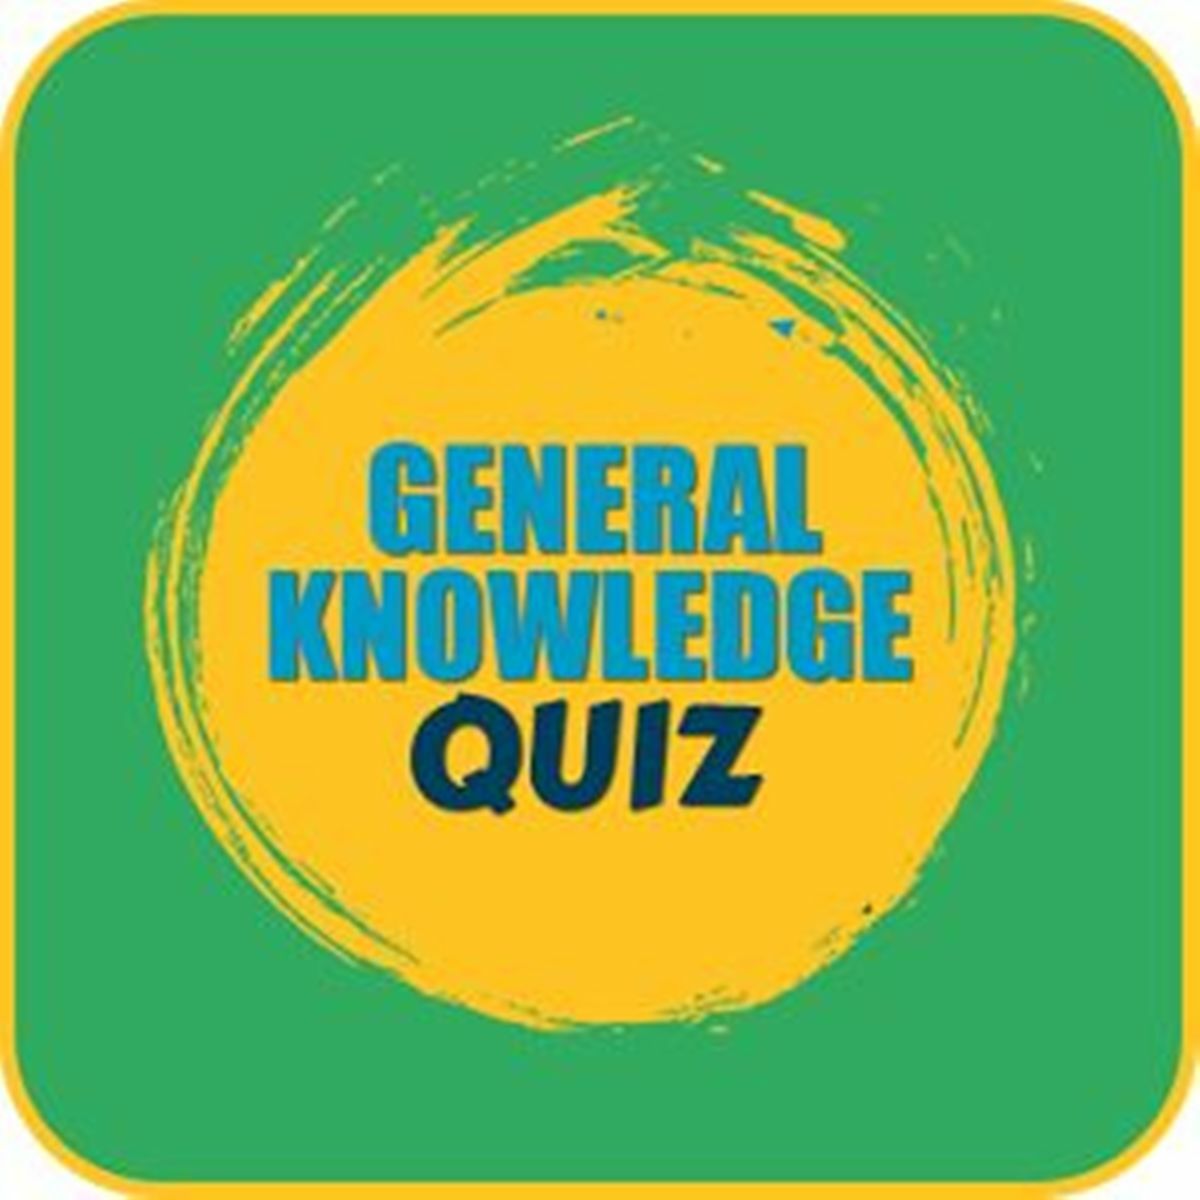 General Knowledge Quiz Question and Answers for Kids & Young Students